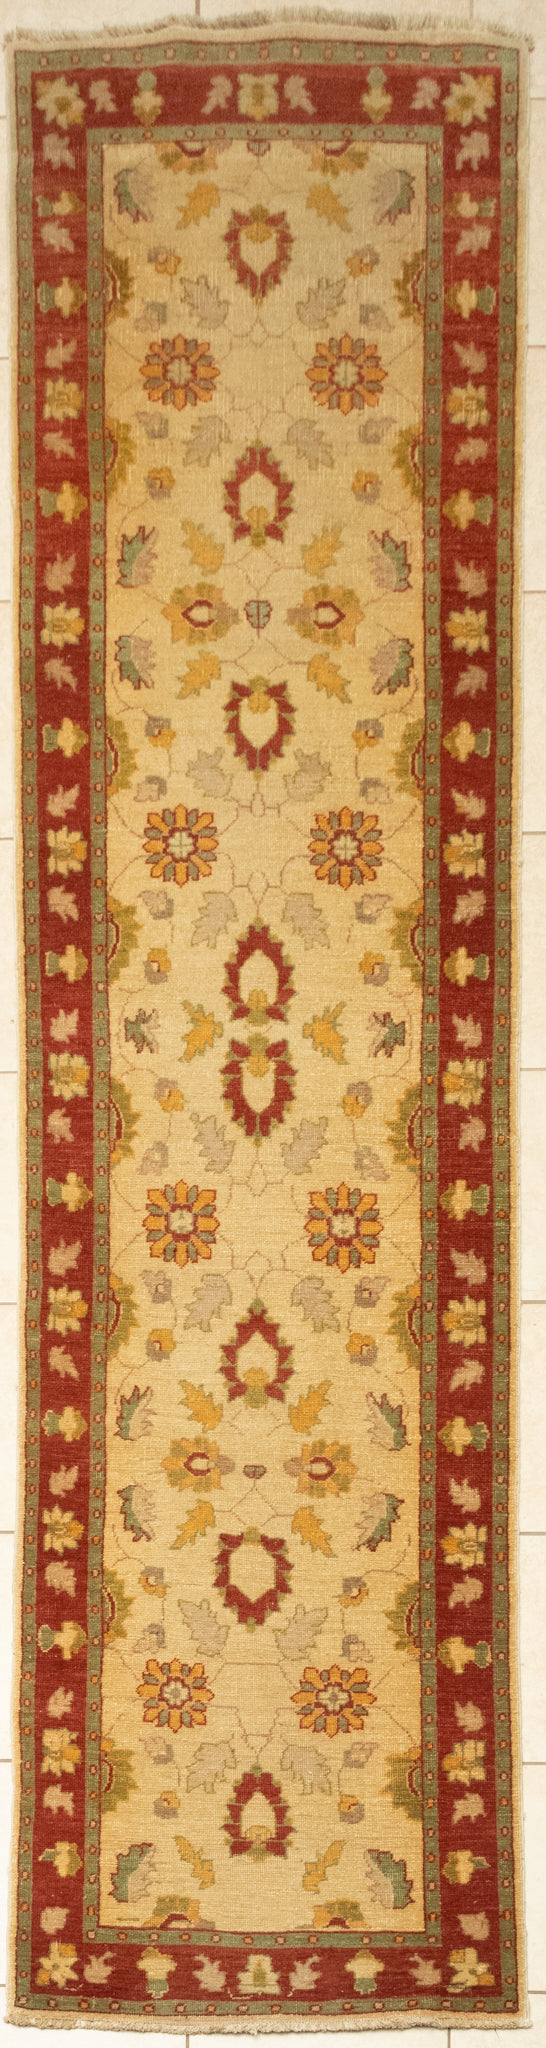 Hand-Knotted Wool Runner 12'8" x 2'6"